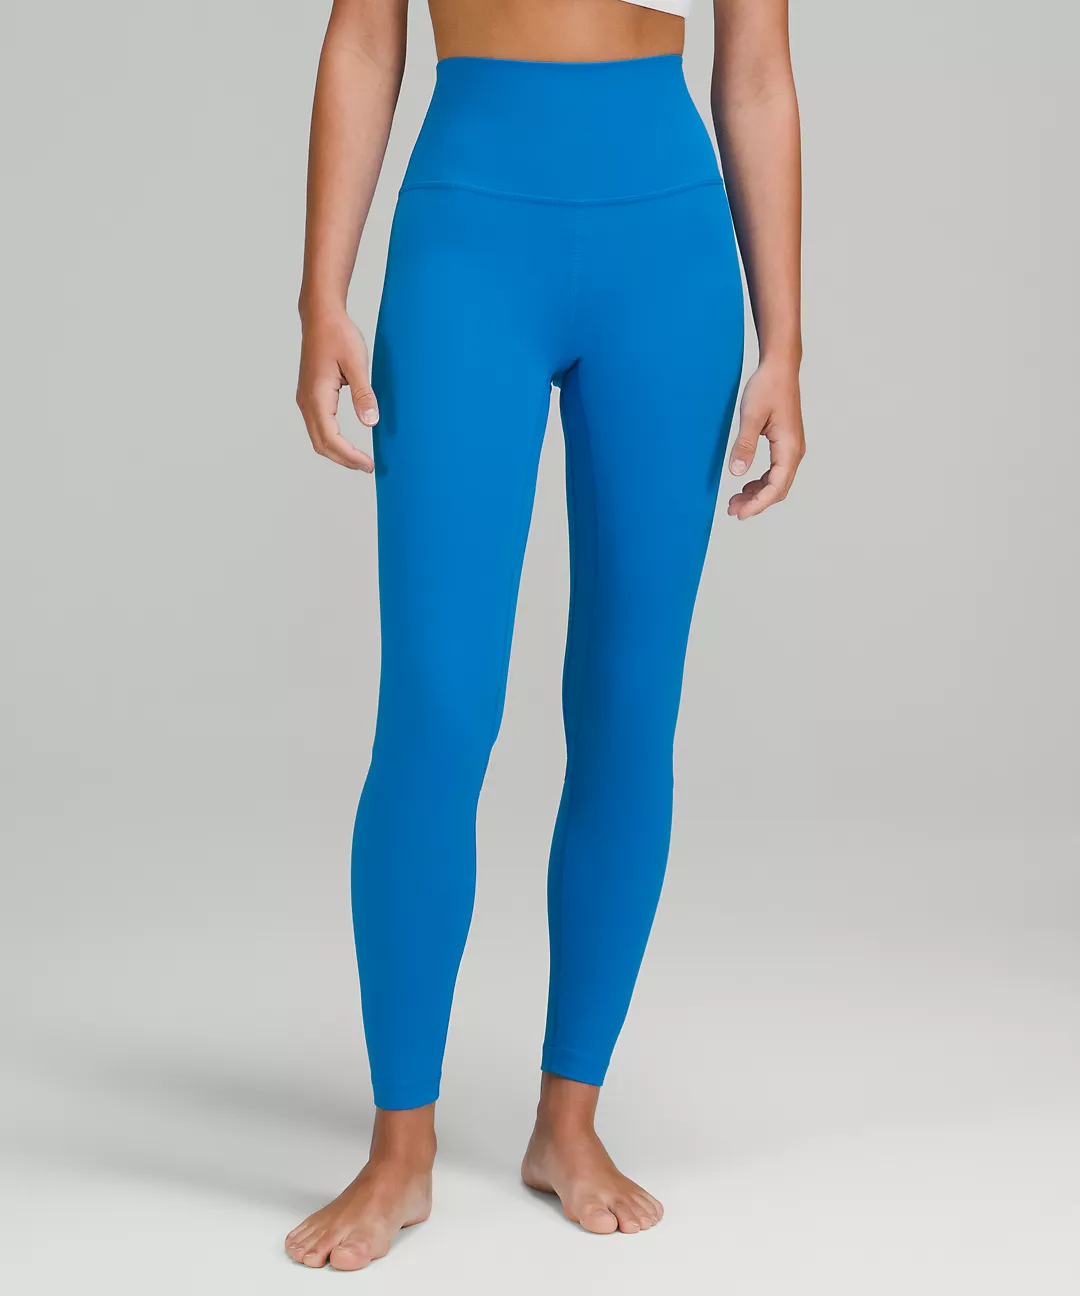 Lululemon Women's Wunder Under Hi-Rise Tight Ombre Speckle 28 Leggings  Size 10 - $40 - From Jessica